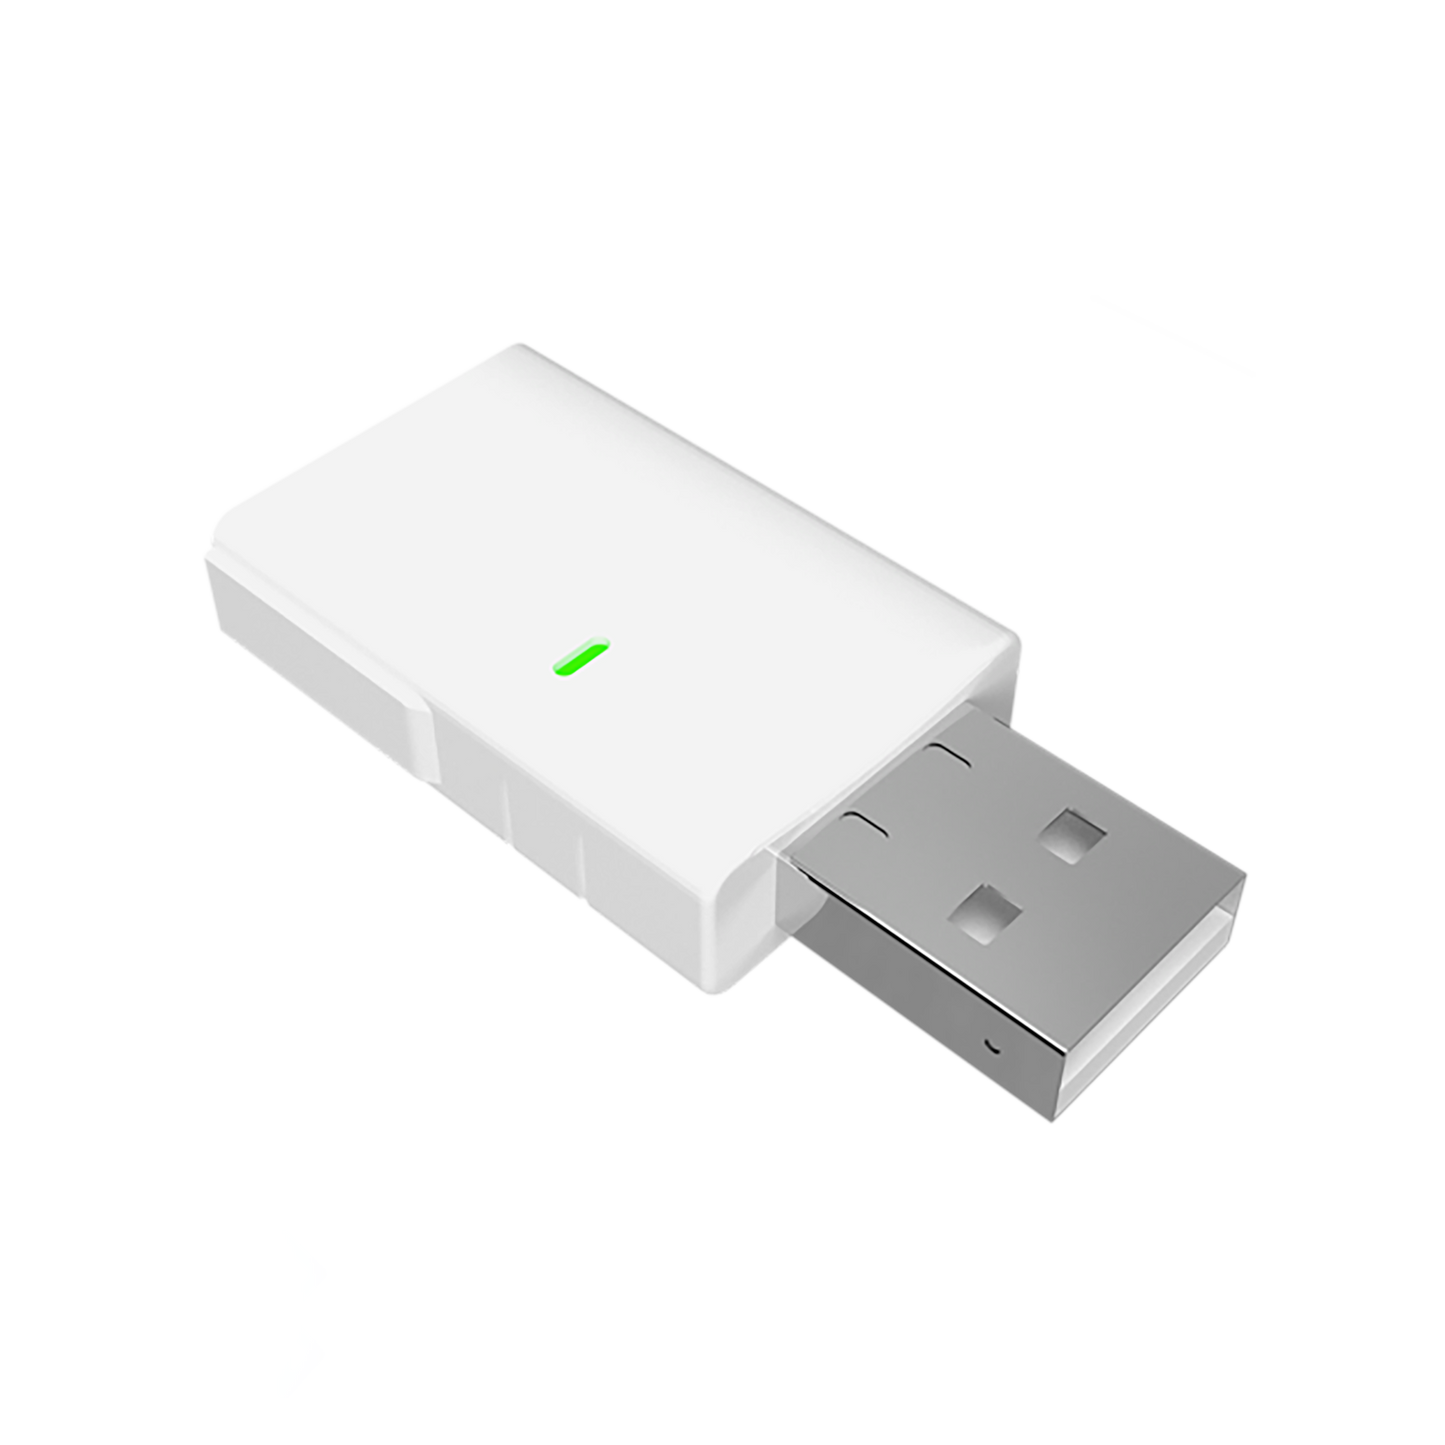 USB-A Bluetooth to Wi-Fi Gateway Dongle, Interconnect your Shelly Devices